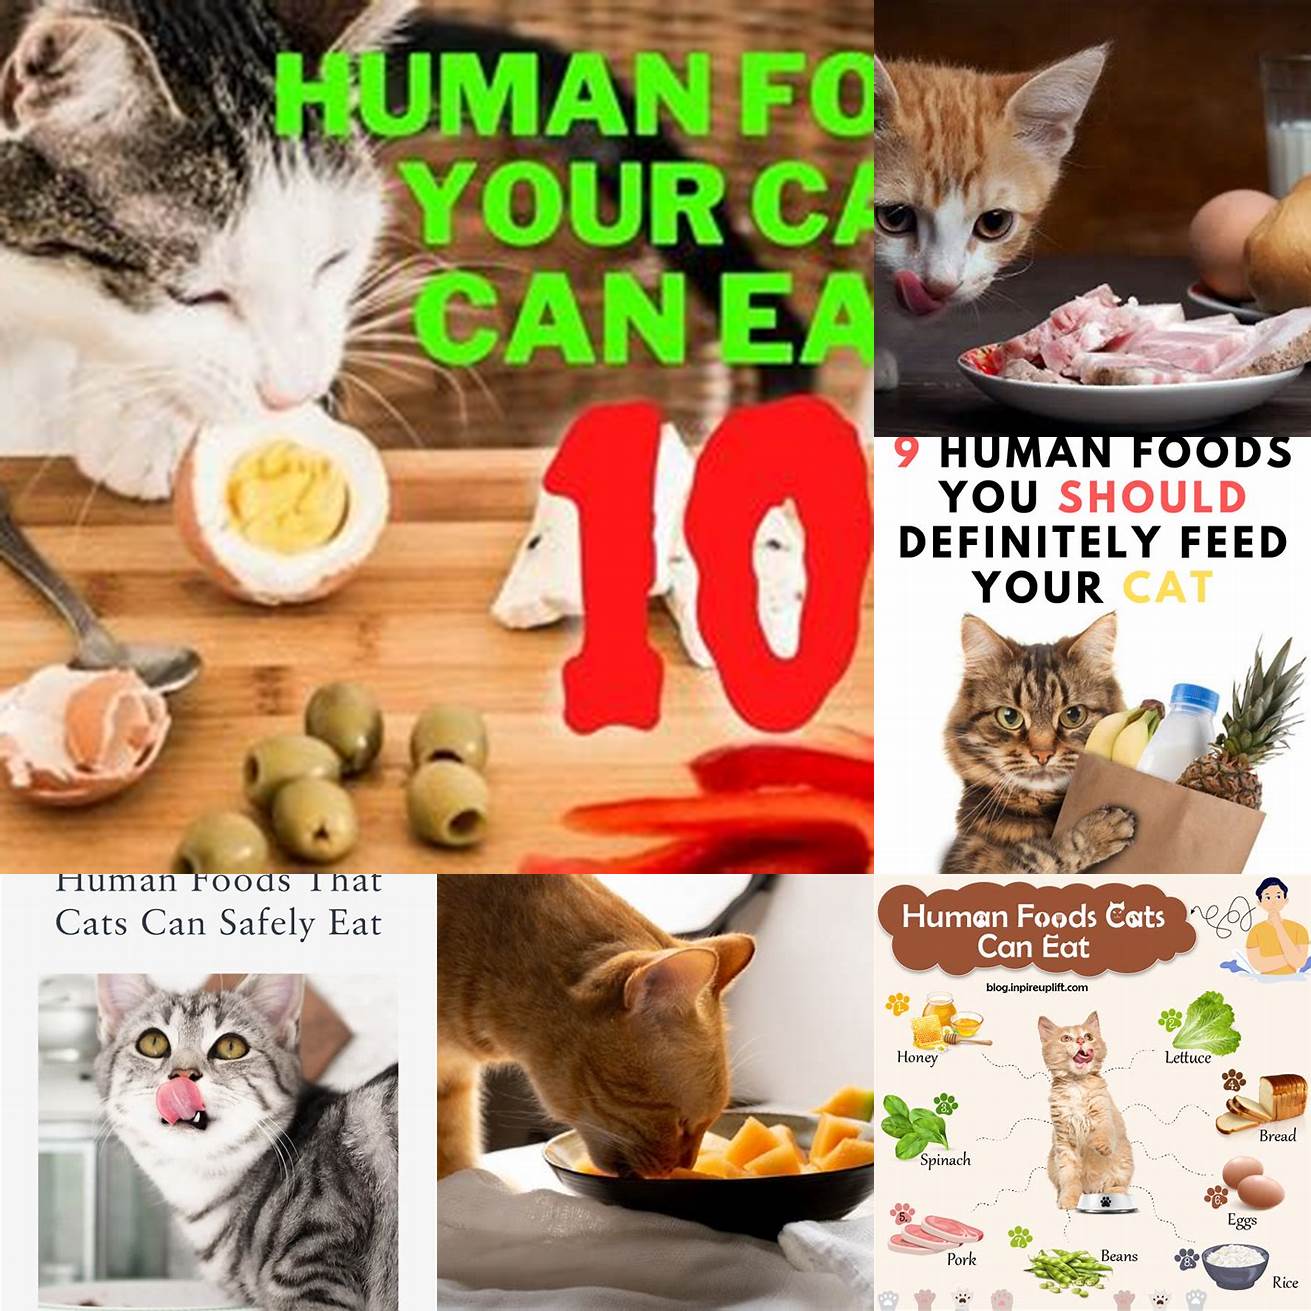 Cat-friendly human food There are many human foods that cats can safely eat in small amounts